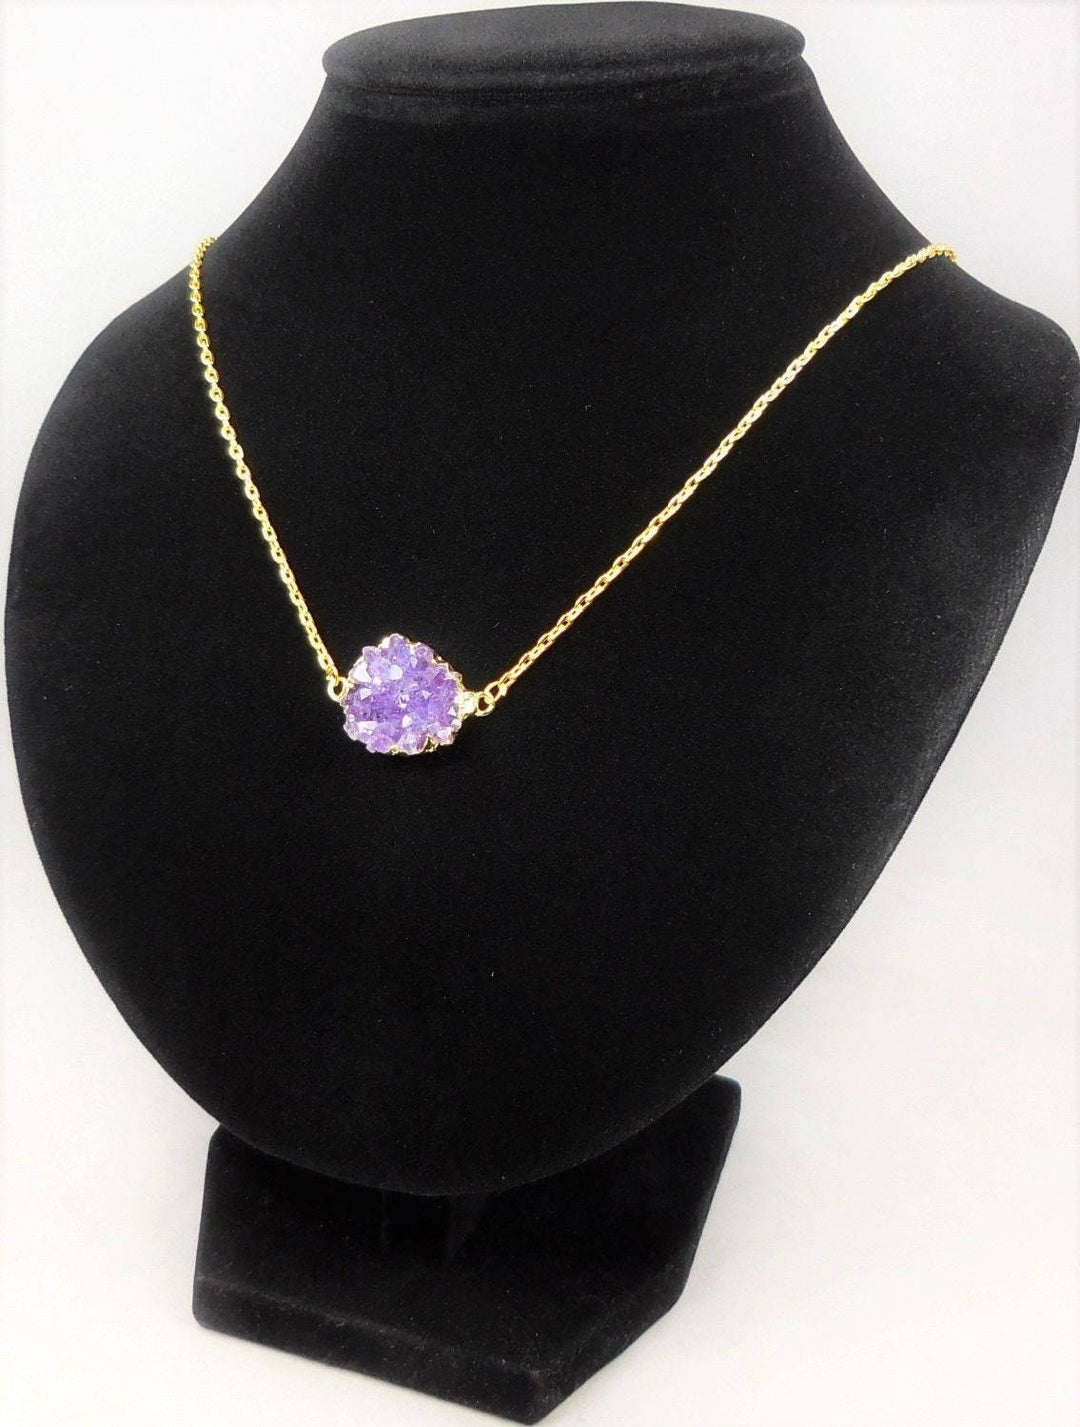 Druzy Amethyst Necklace - Petite Purple Crystal Cluster Connector Pendant - Gold Plated